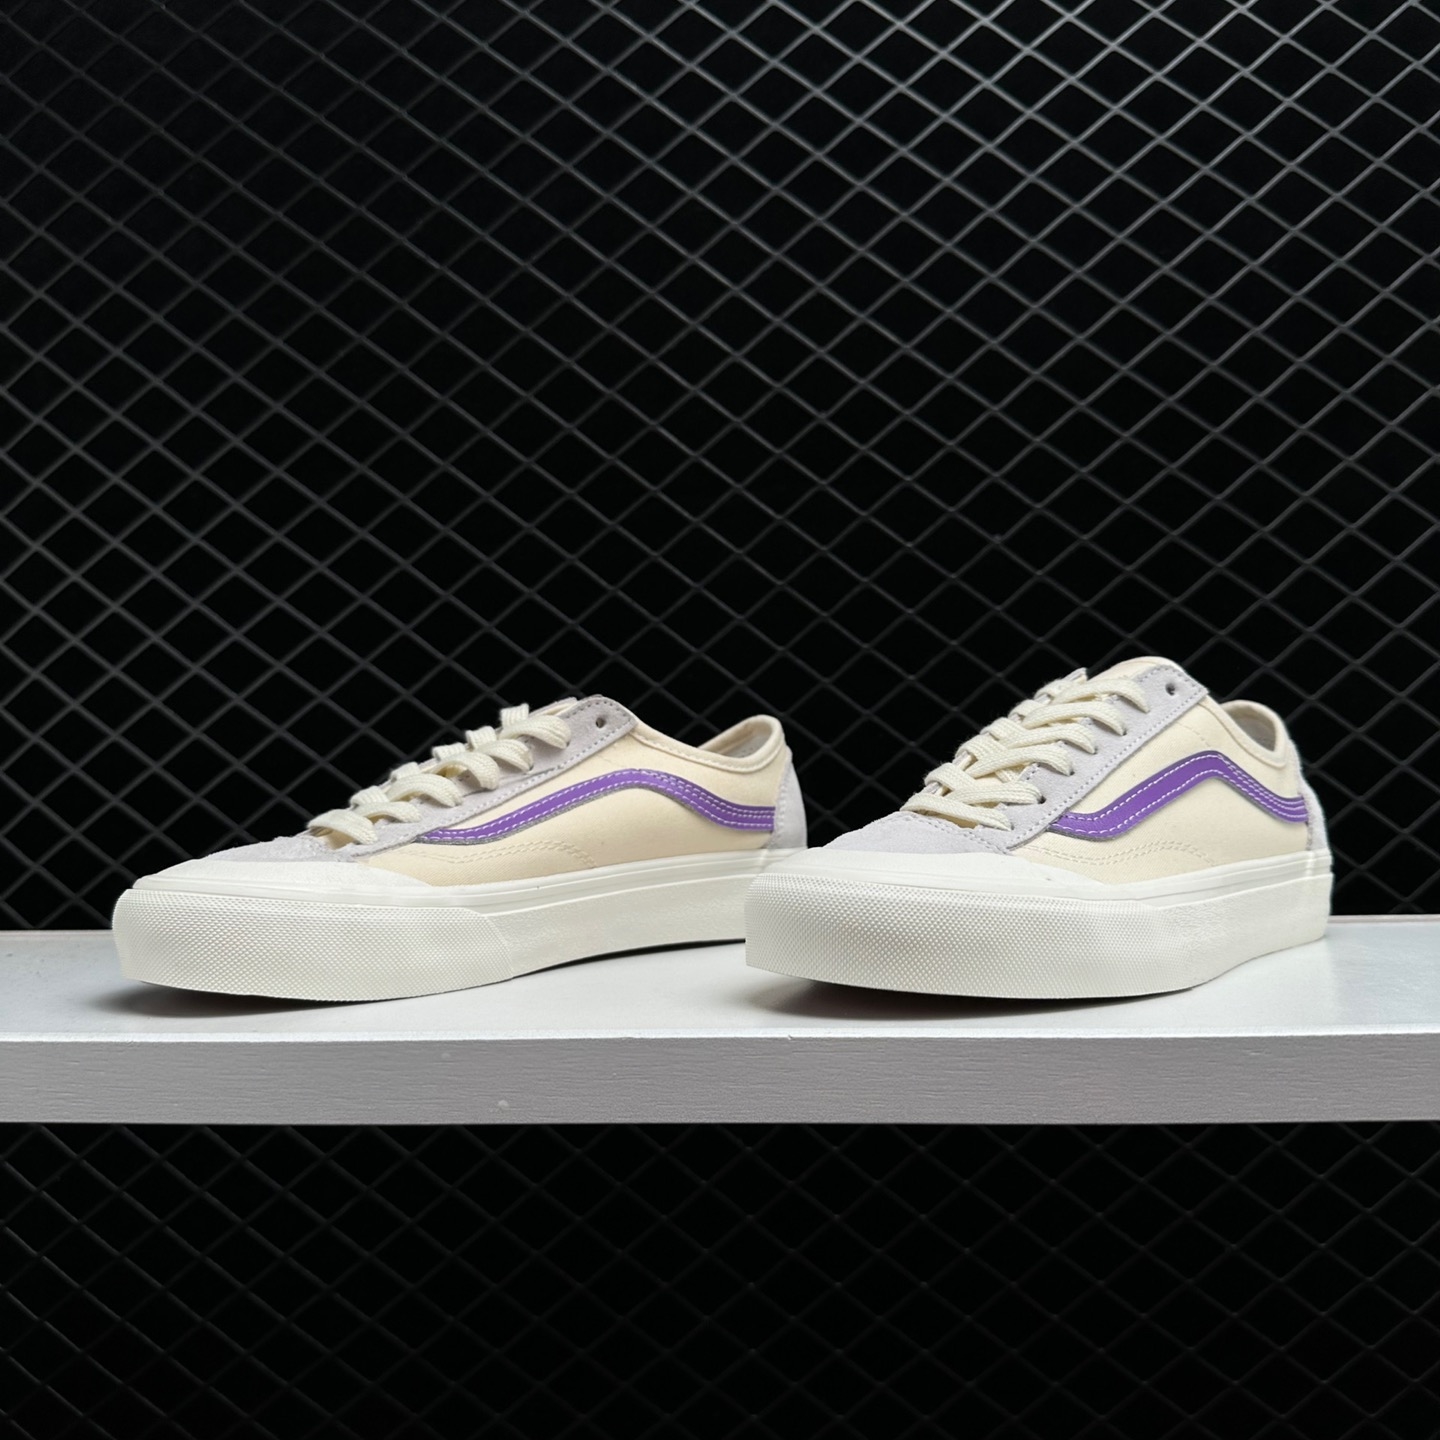 Vans Style 36 Decon SF 'White Purple' VN0A5HFF2Z2 - Retro-inspired Sneakers in White and Purple